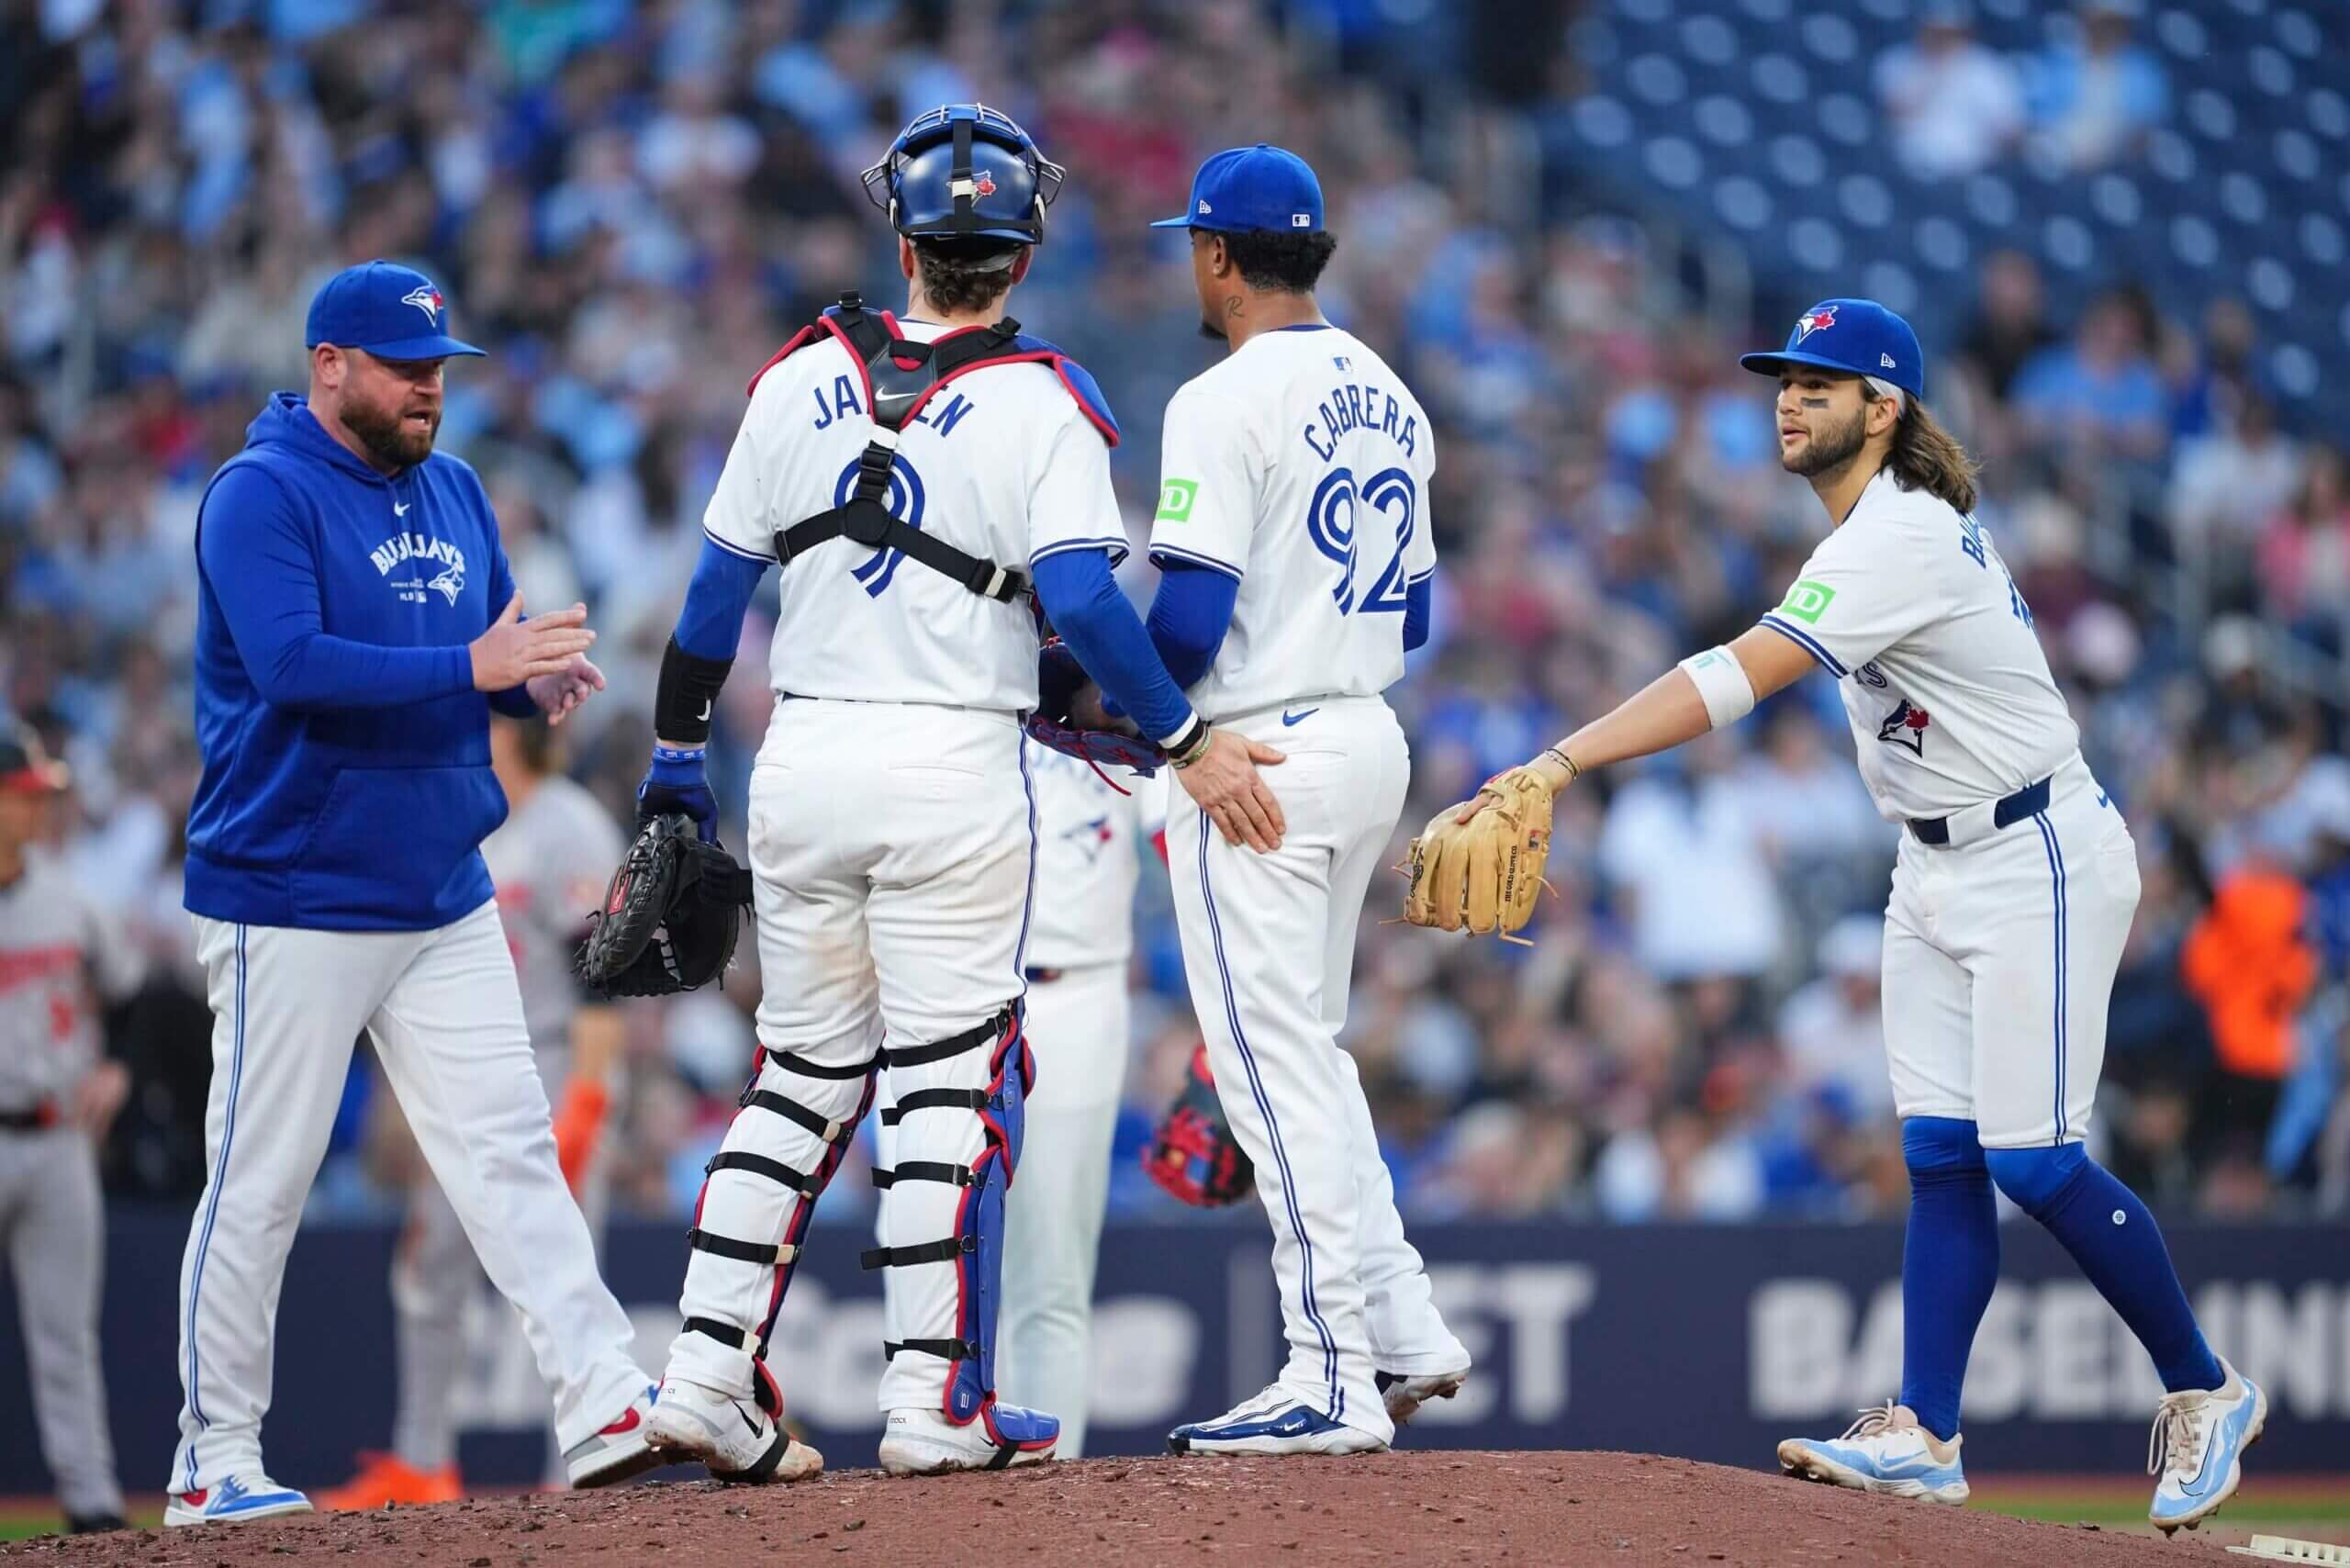 Three Blue Jays takeaways: Inconsistent offence, bad injury luck led to poor first half